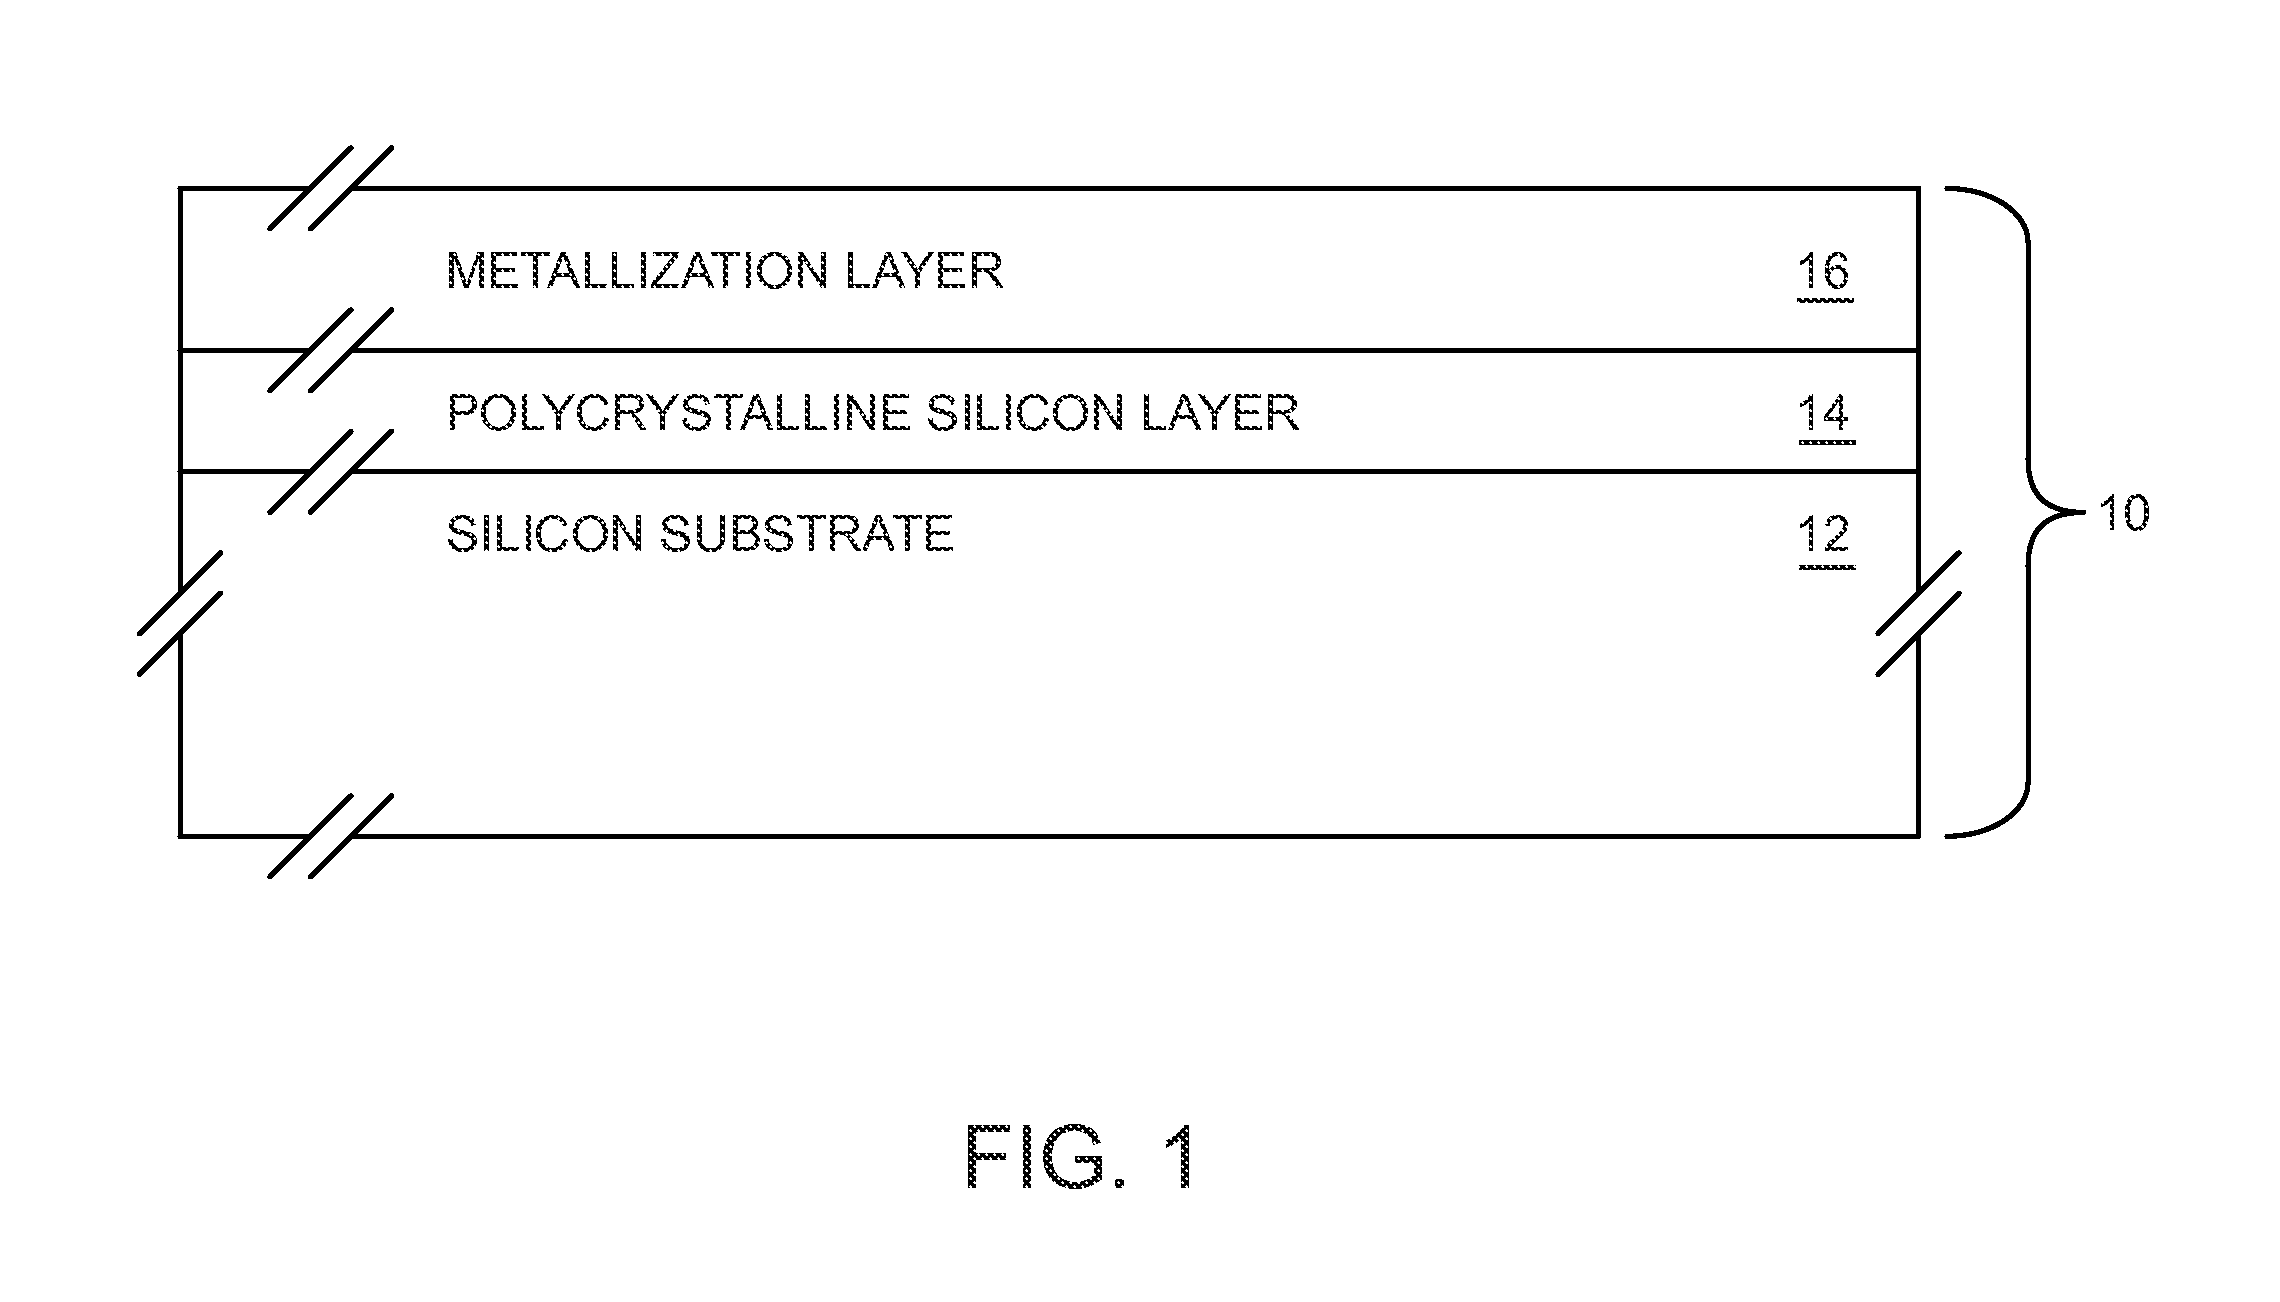 Linearity improvements of semiconductor substrate based radio frequency devices